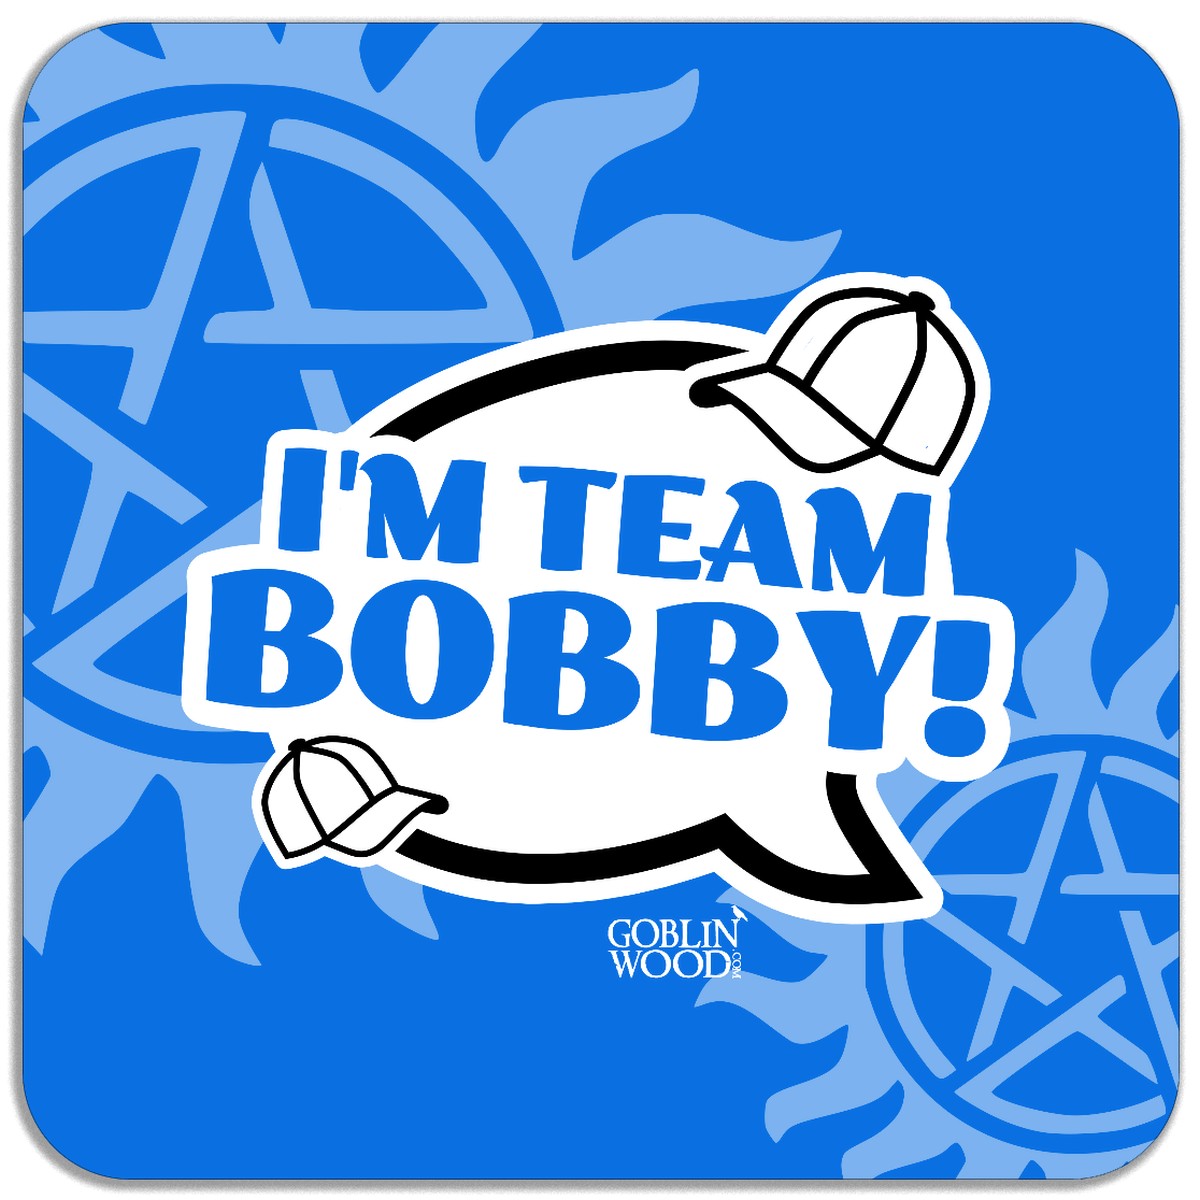 I'm Team Bobby! Speech Bubble Magnet - Supernatural Inspired - Goblin Wood Exclusive